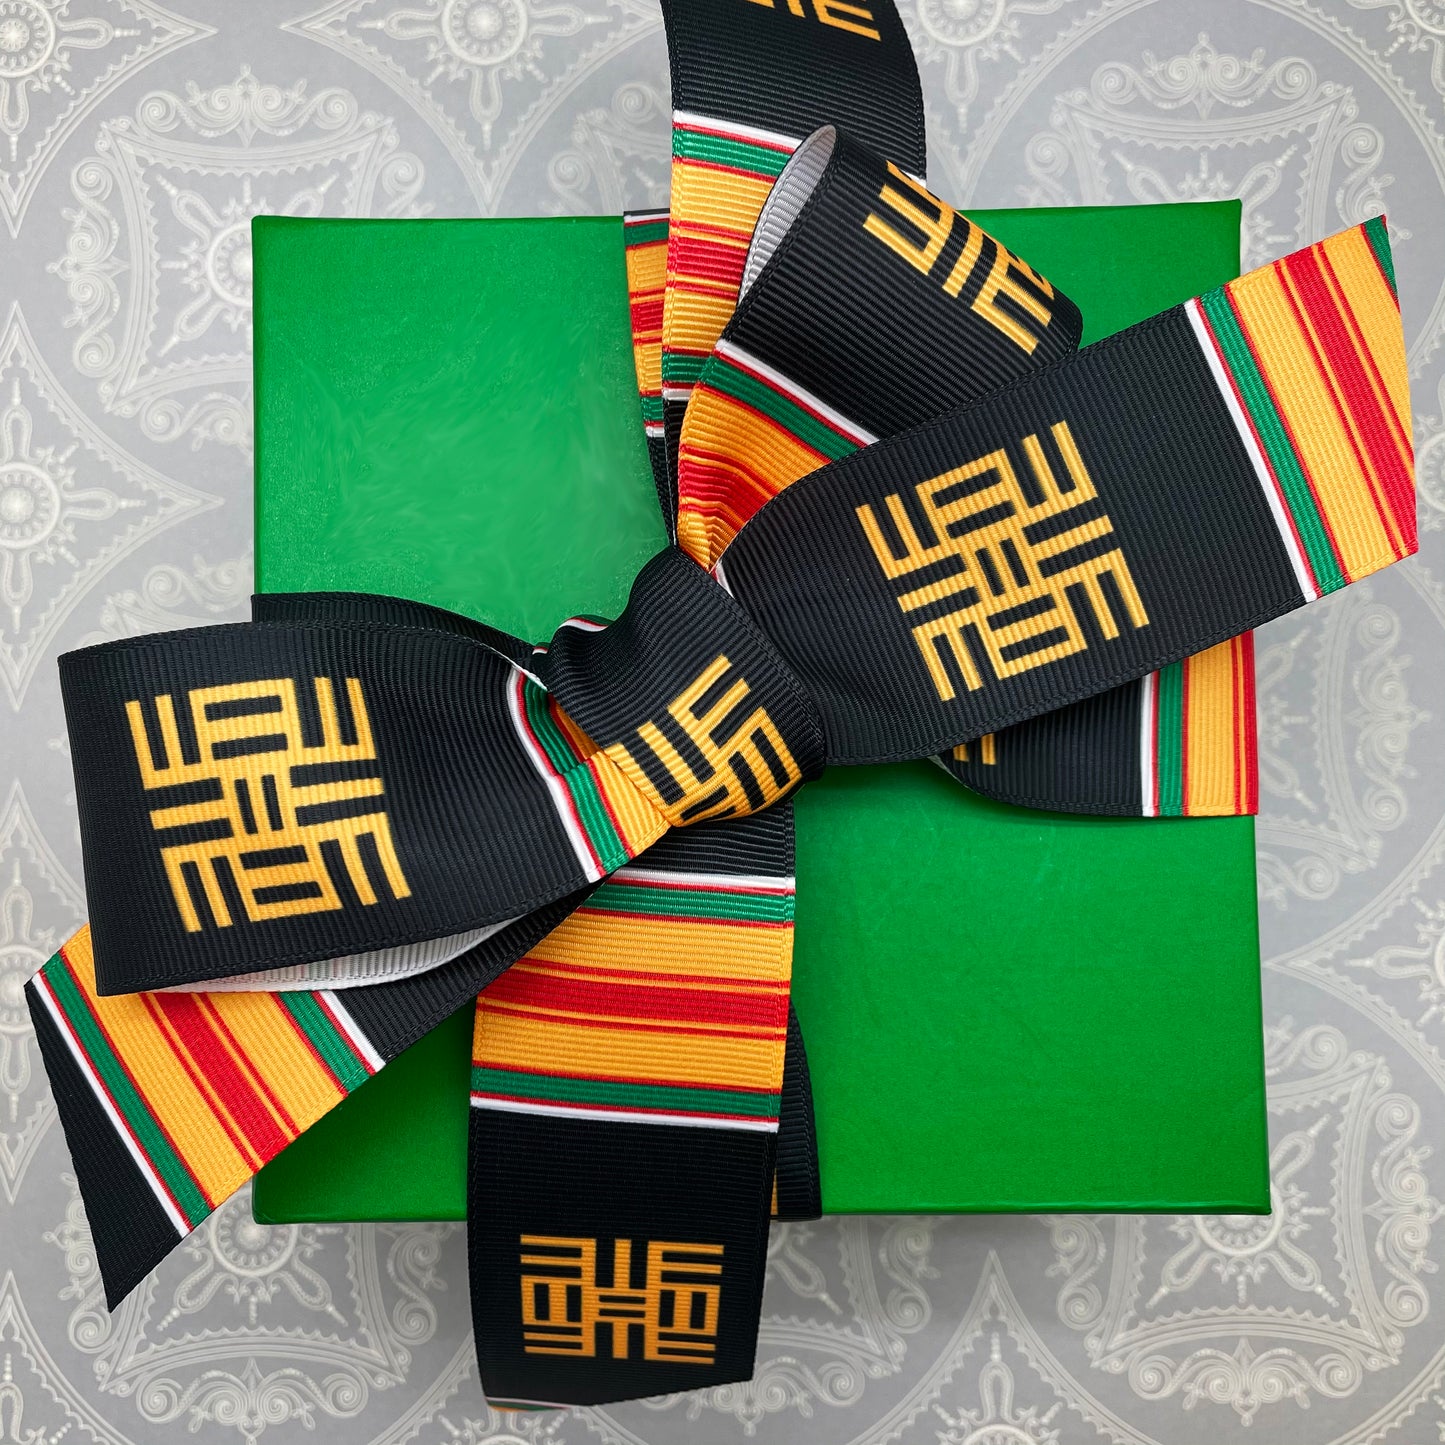 African Tribal ribbon Kente design with education stole i printed on 1.5" white grosgrain